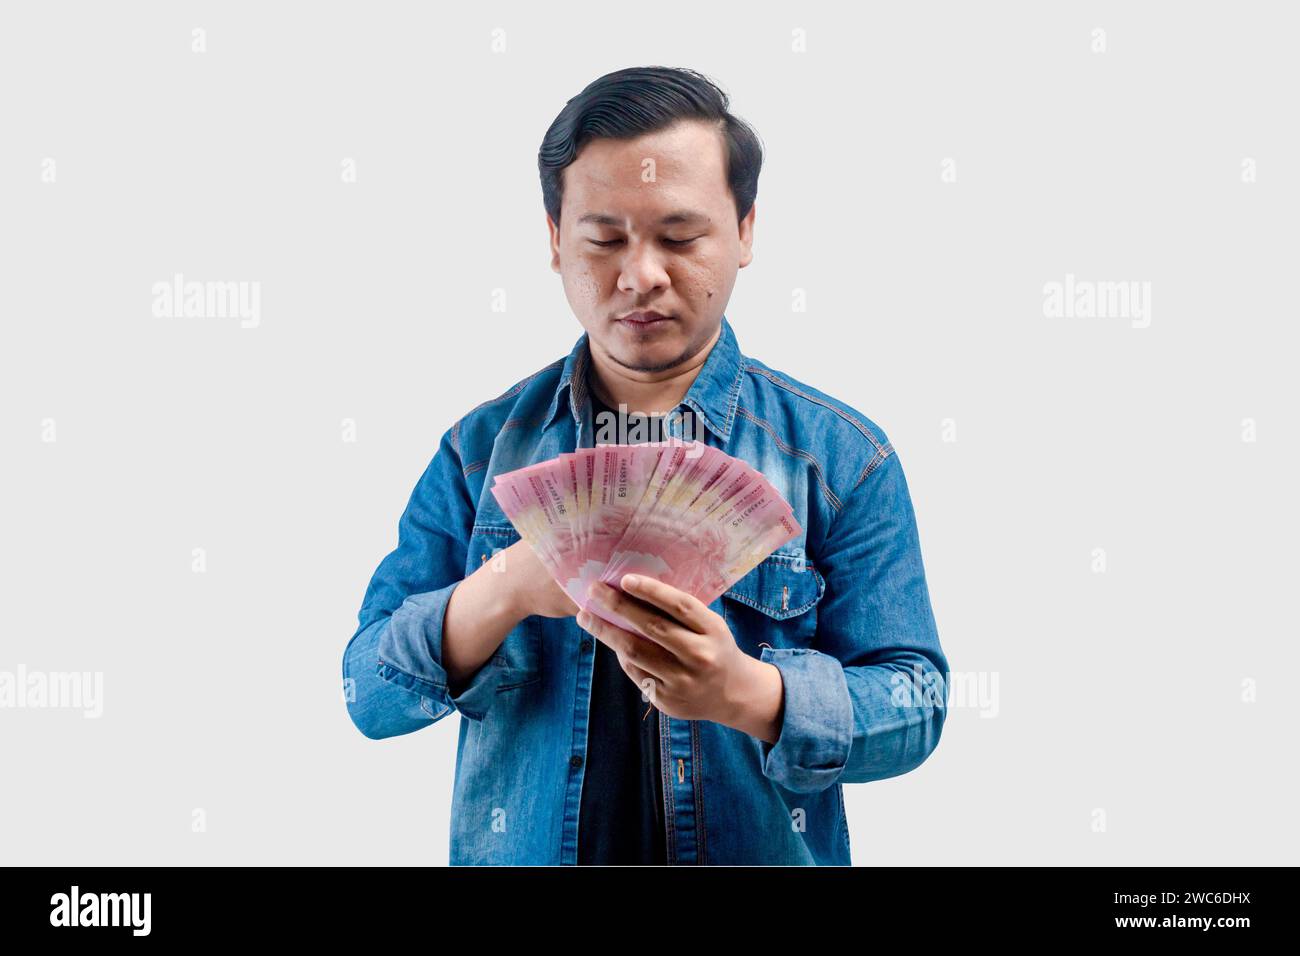 Young Asian man showing worried face expression while holding paper money Stock Photo